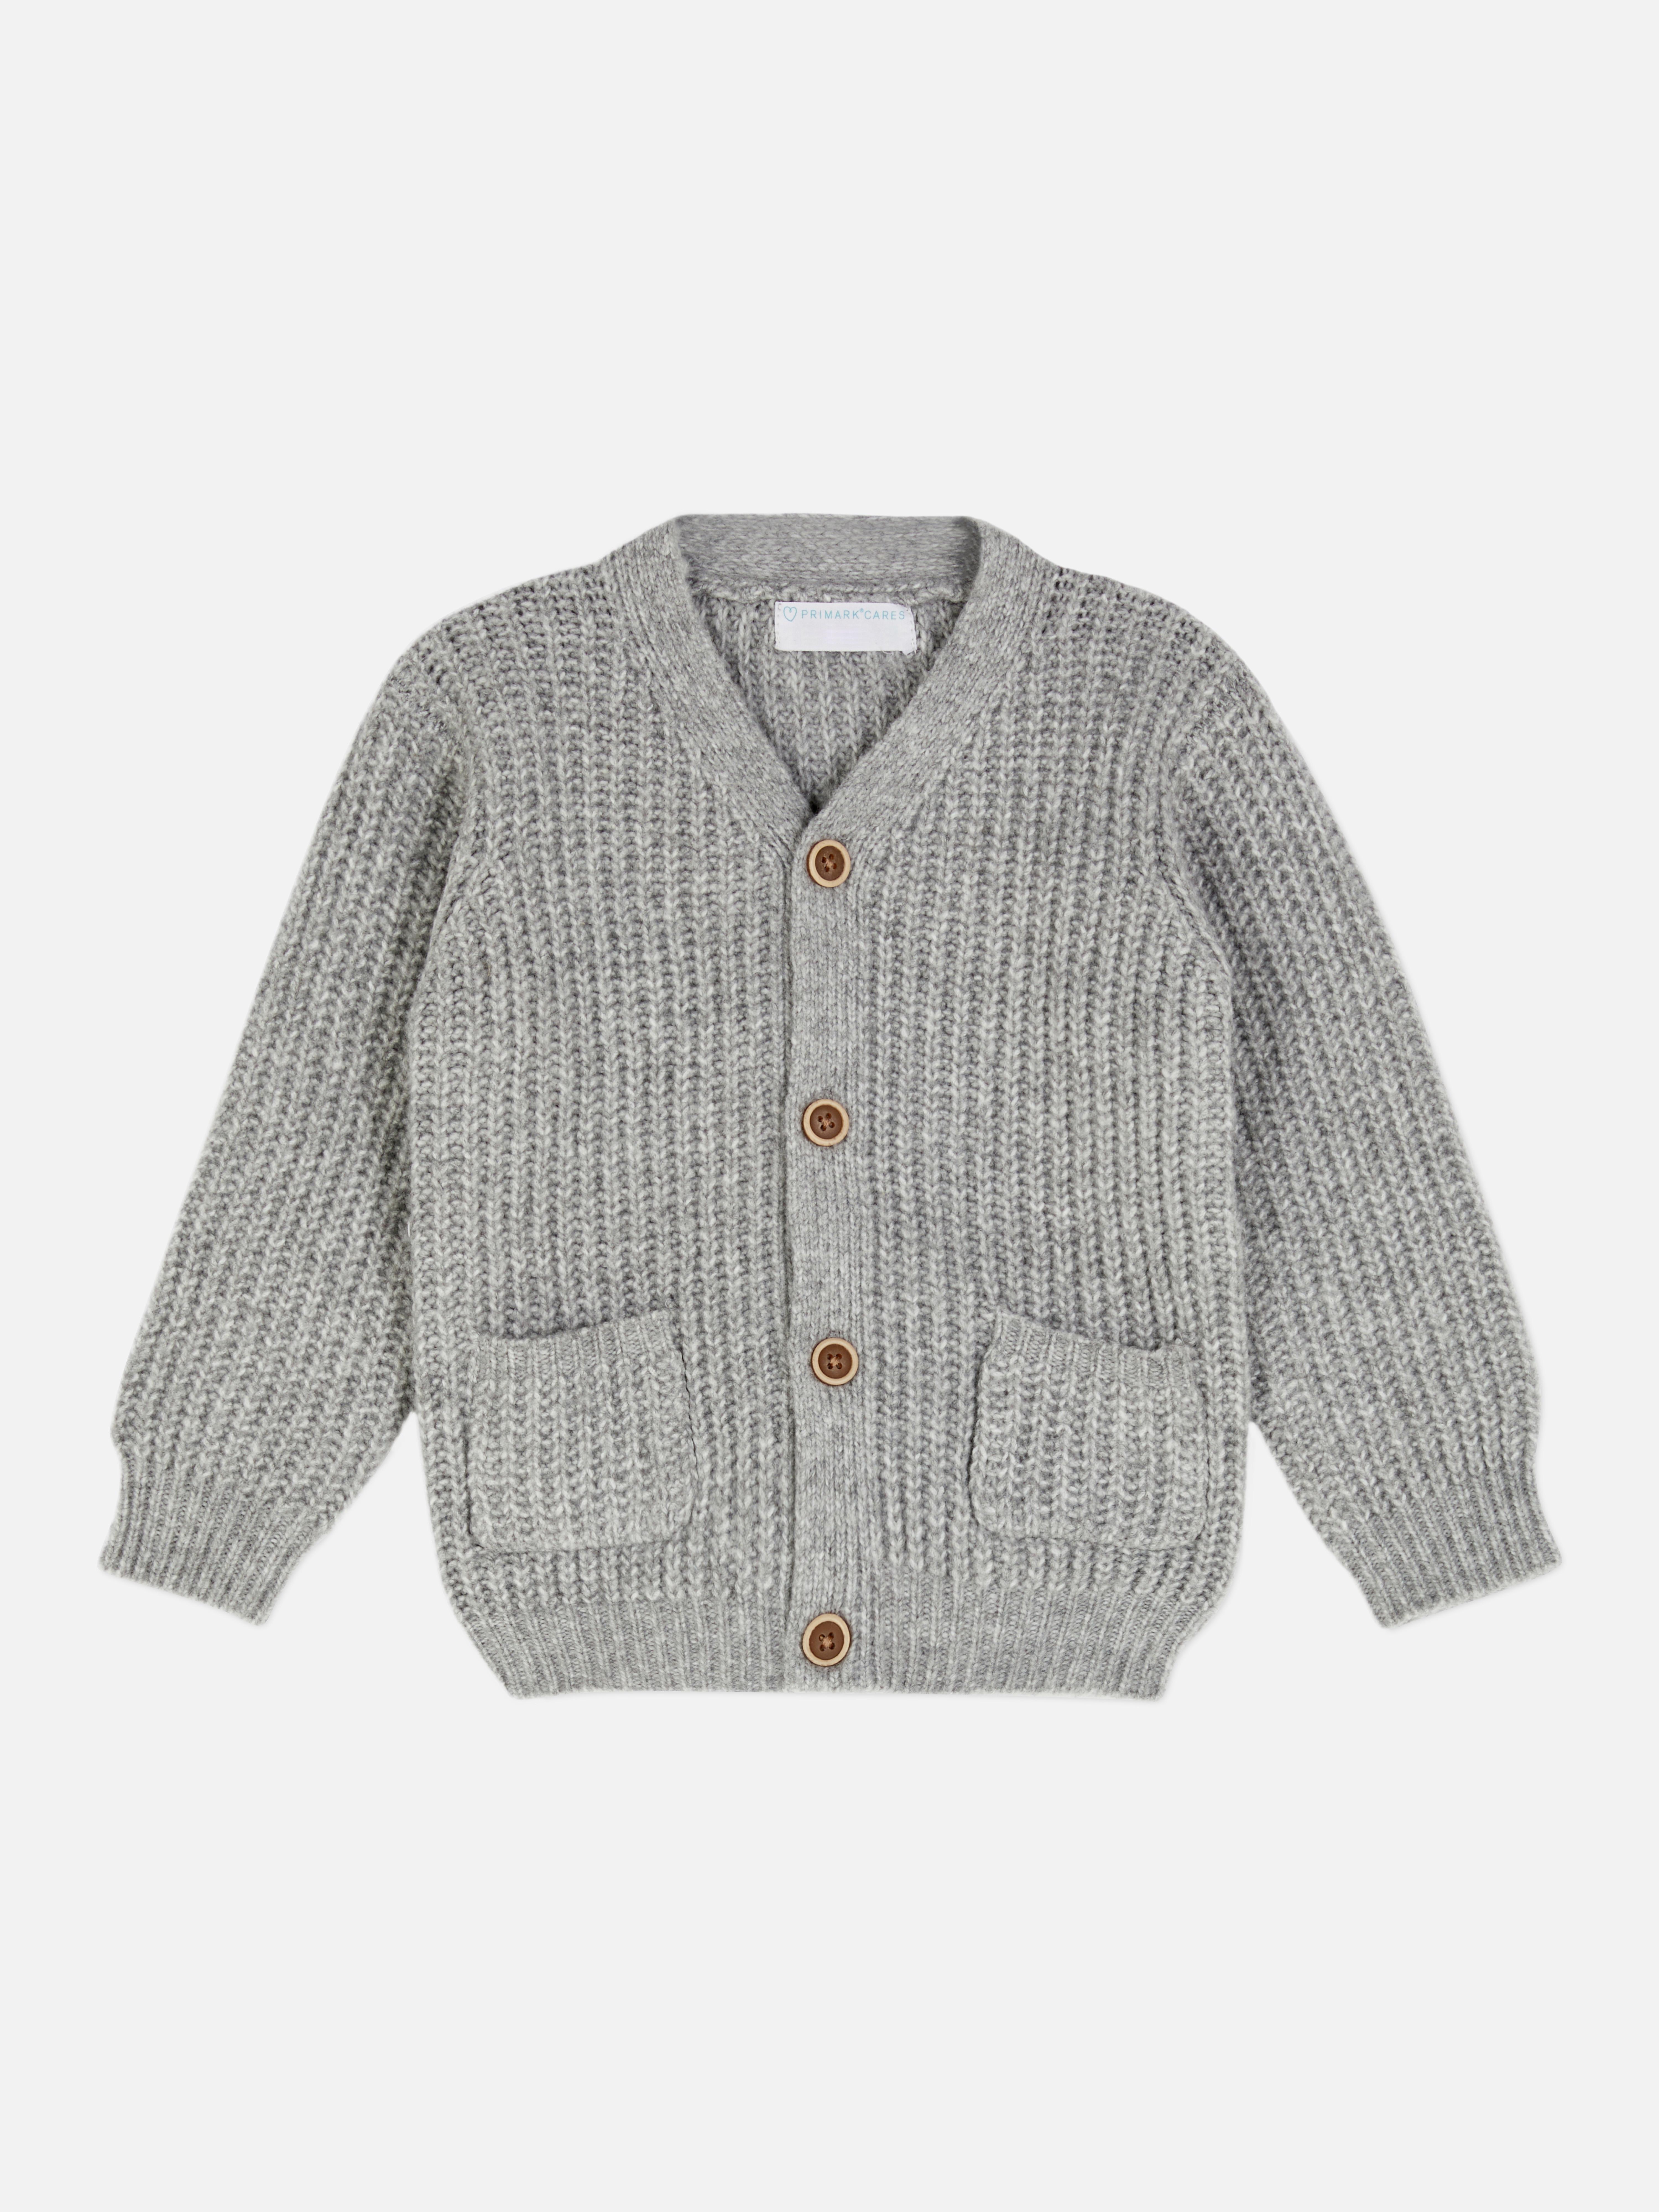 Chunky Knit Cardigan | Baby Boy Clothes | Baby & Newborn Clothes | Kids ...